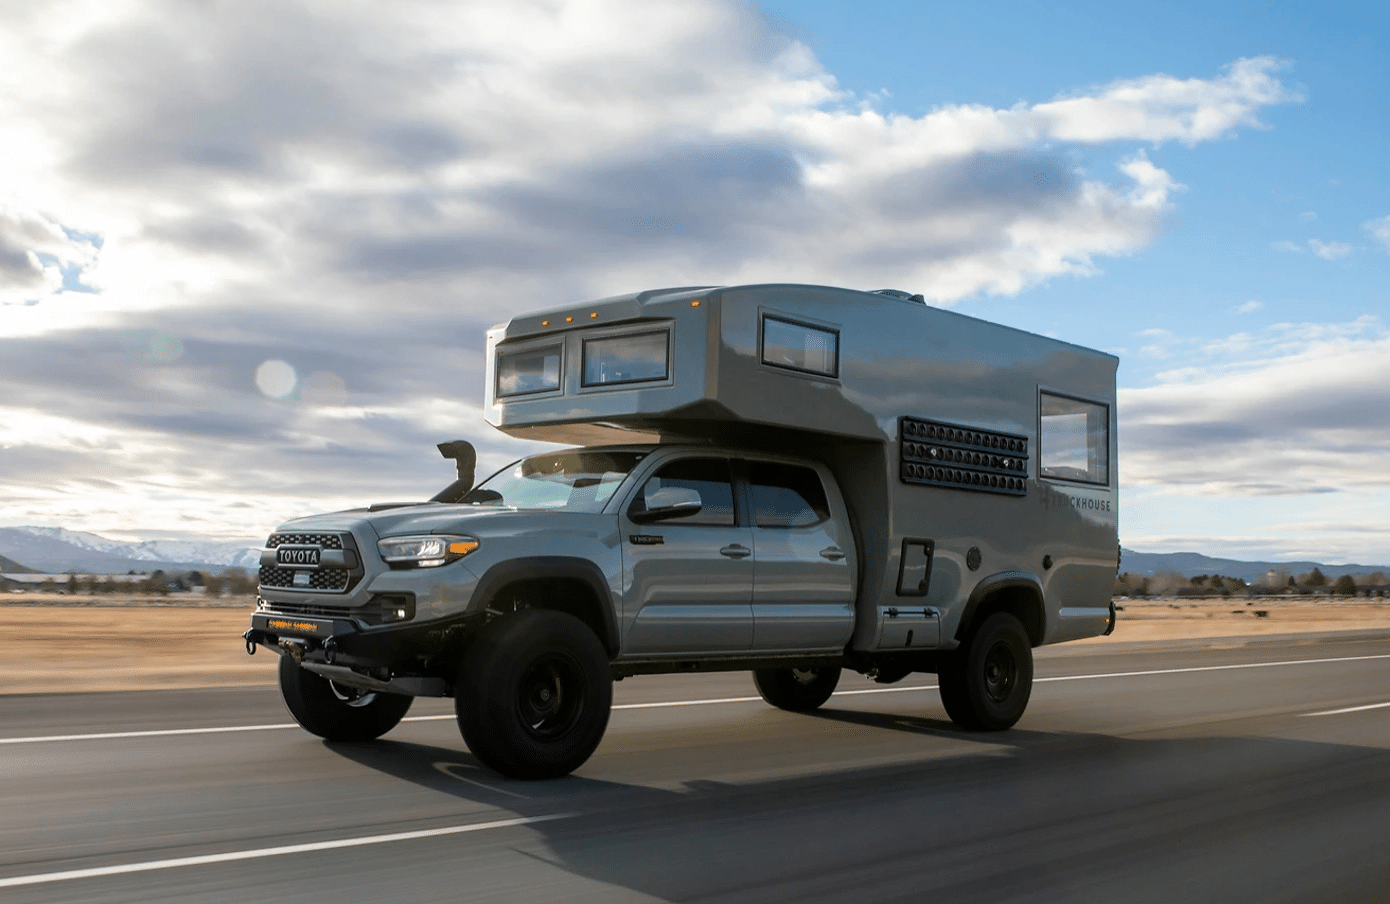 Truckhouse campers are the perfect off-road vehicles for long term boondocking.